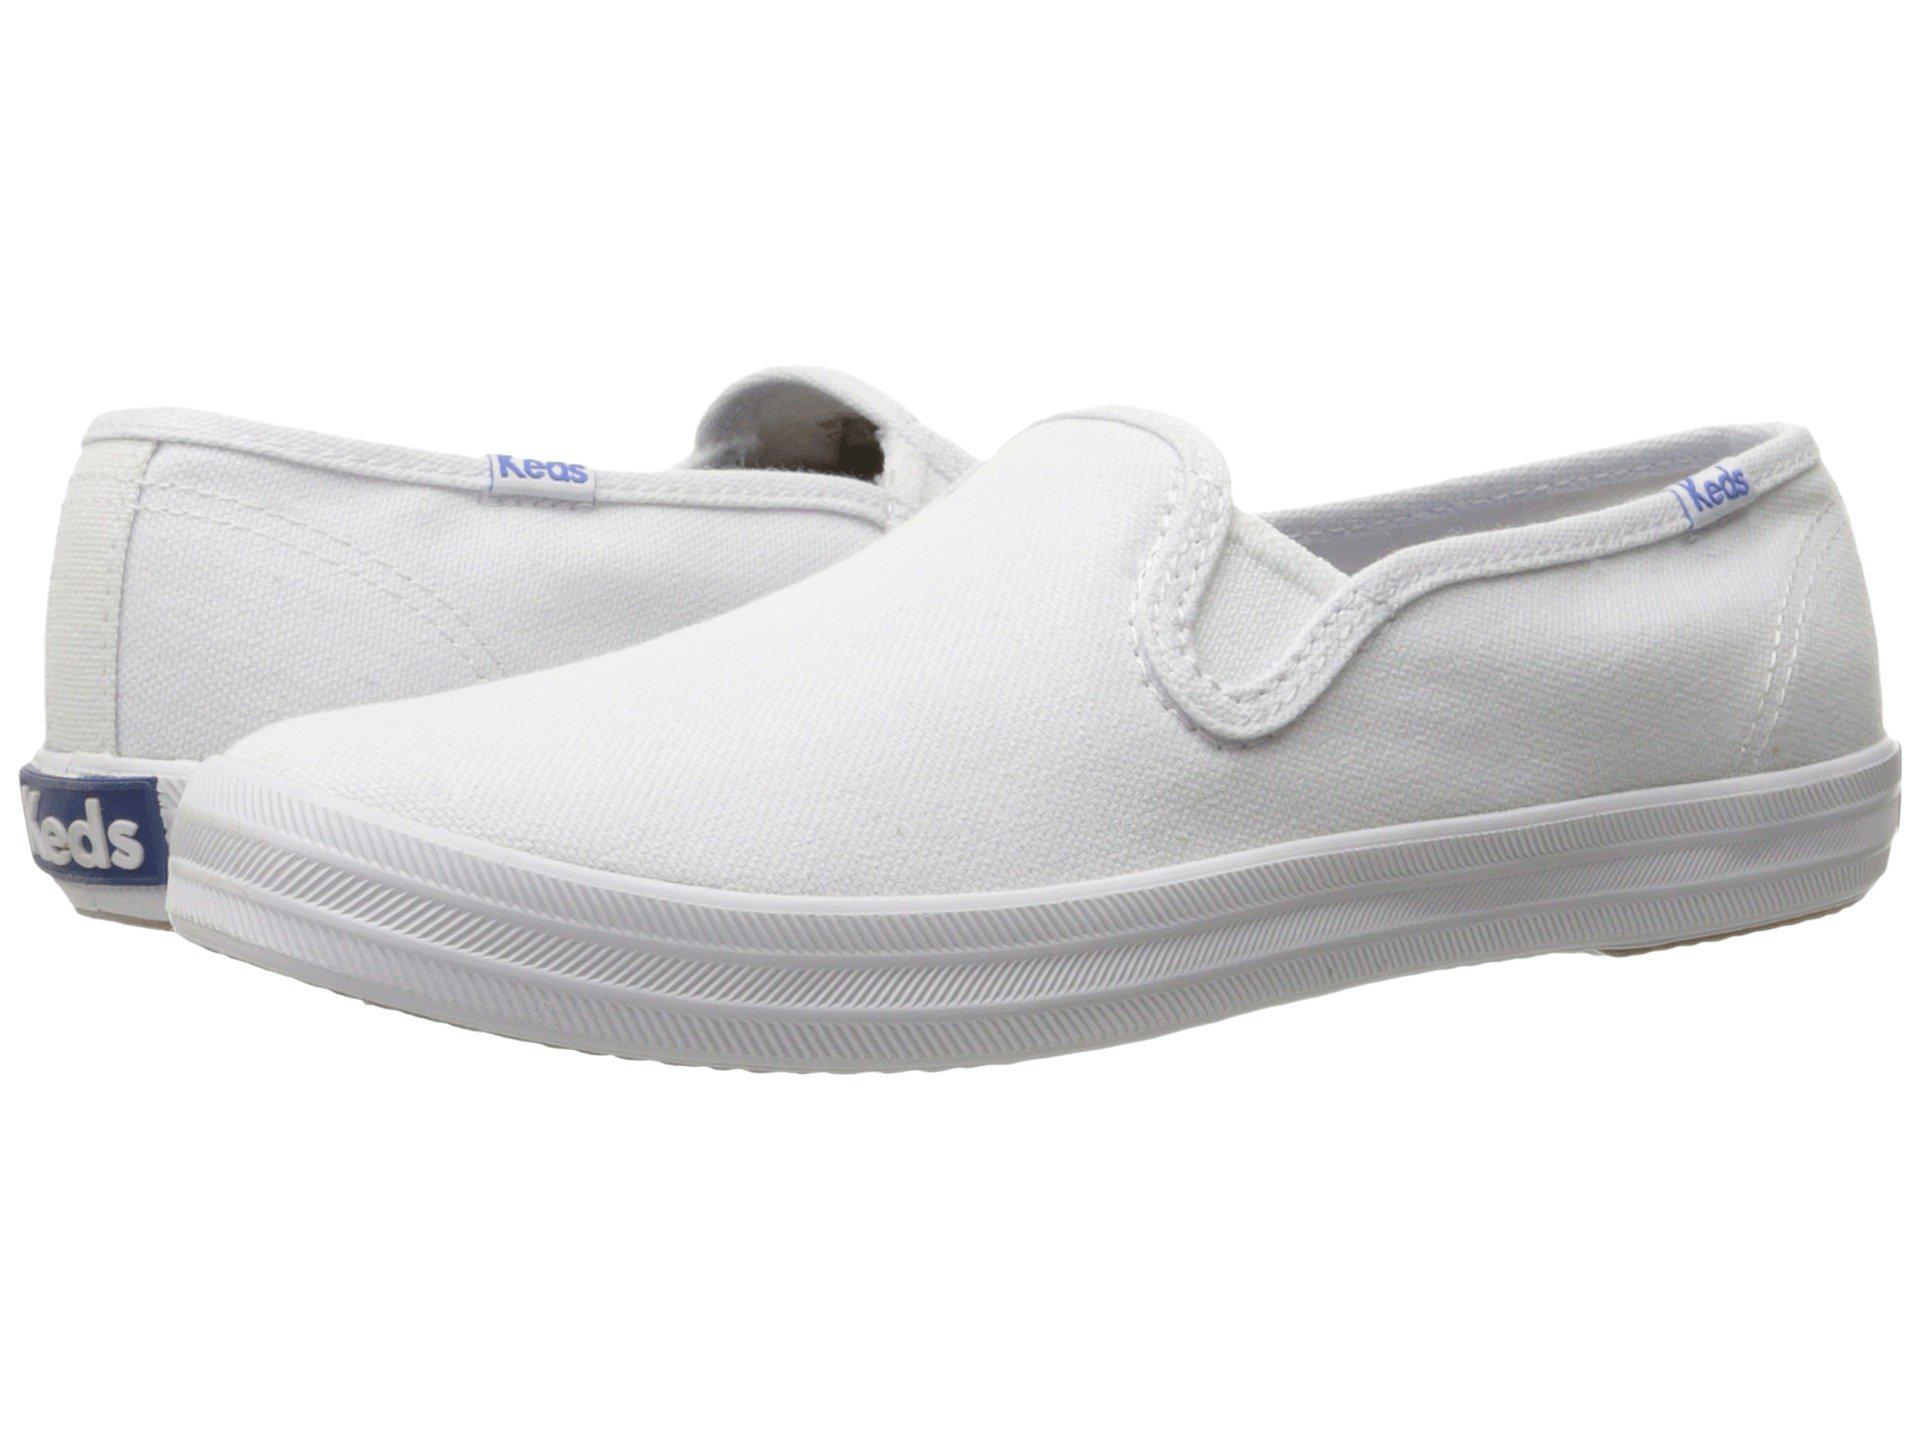 Lyst - Keds Champion-canvas Slip-on in White